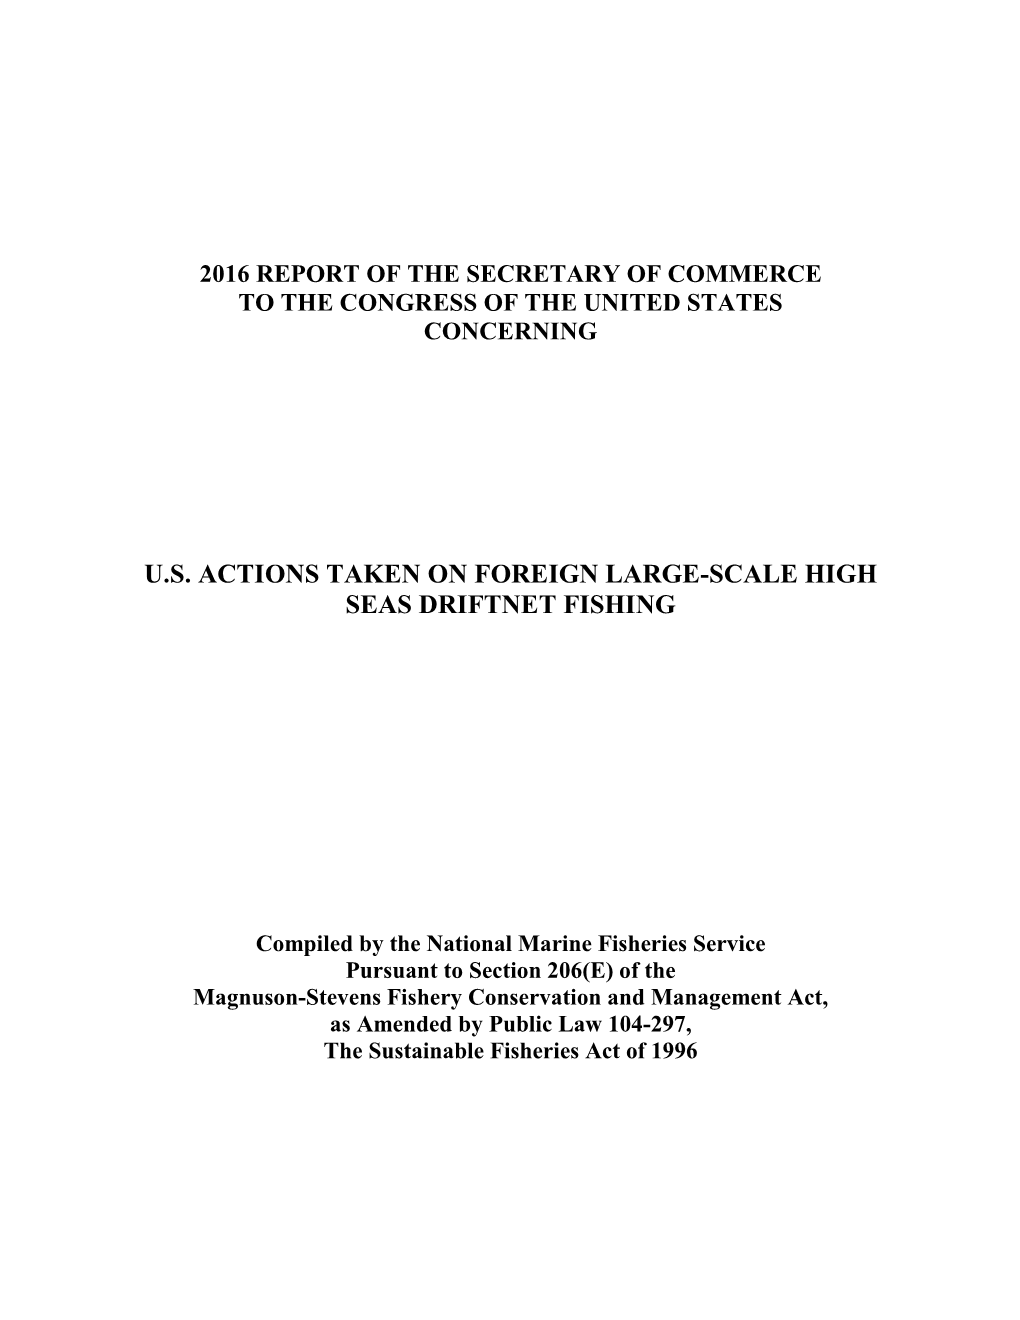 2016 Report to Congress on Foreign Large-Scale High Seas Driftnet Fishing